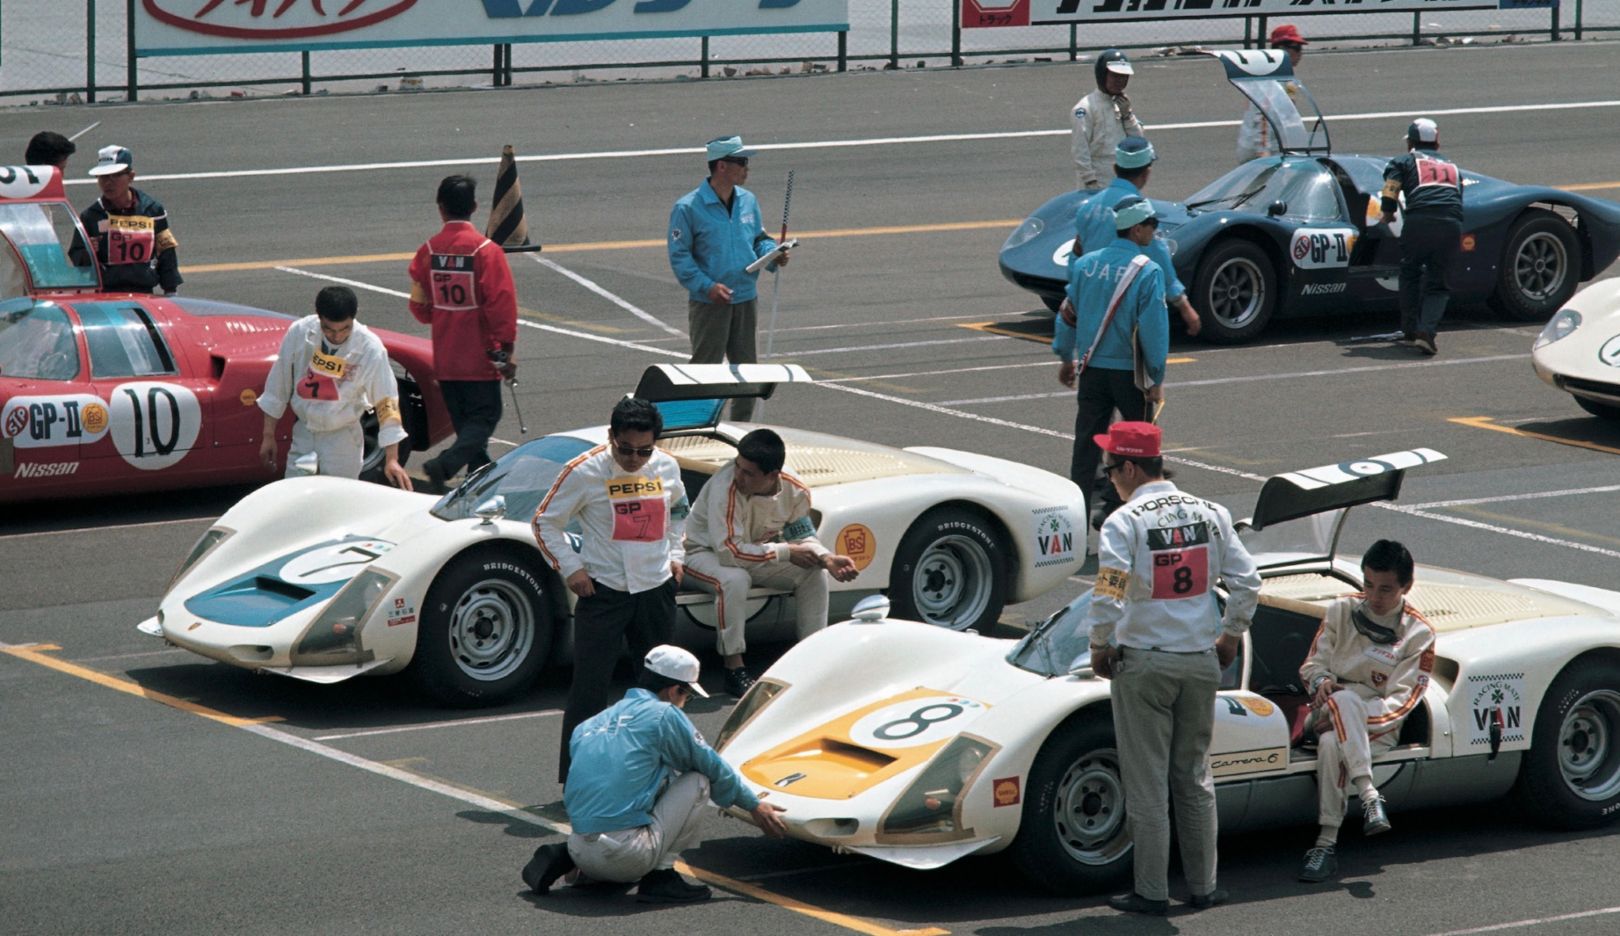 Lap record in the making: Tetsu Ikuzawa clocks a lap of 2:00.800 minutes in a Porsche 906 Carrera 6 (start number 8) at the Japanese Grand Prix on Fuji Speedway in May 1967.